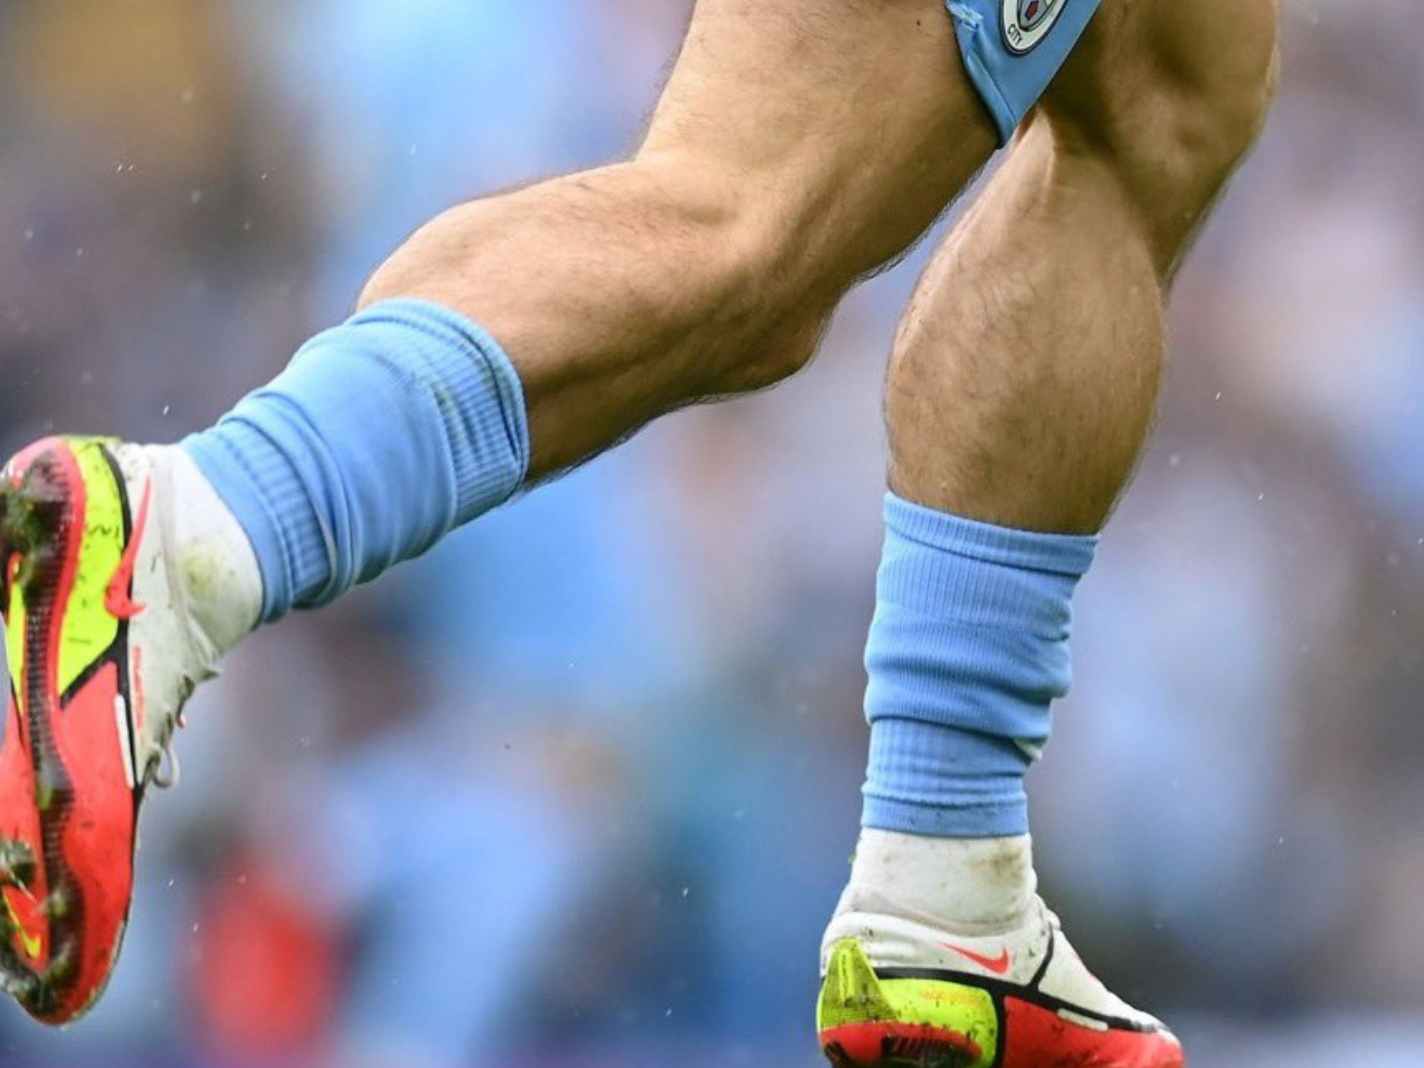 Are Jack Grealish’s Calves The Most Talked-about Body Part in UK?